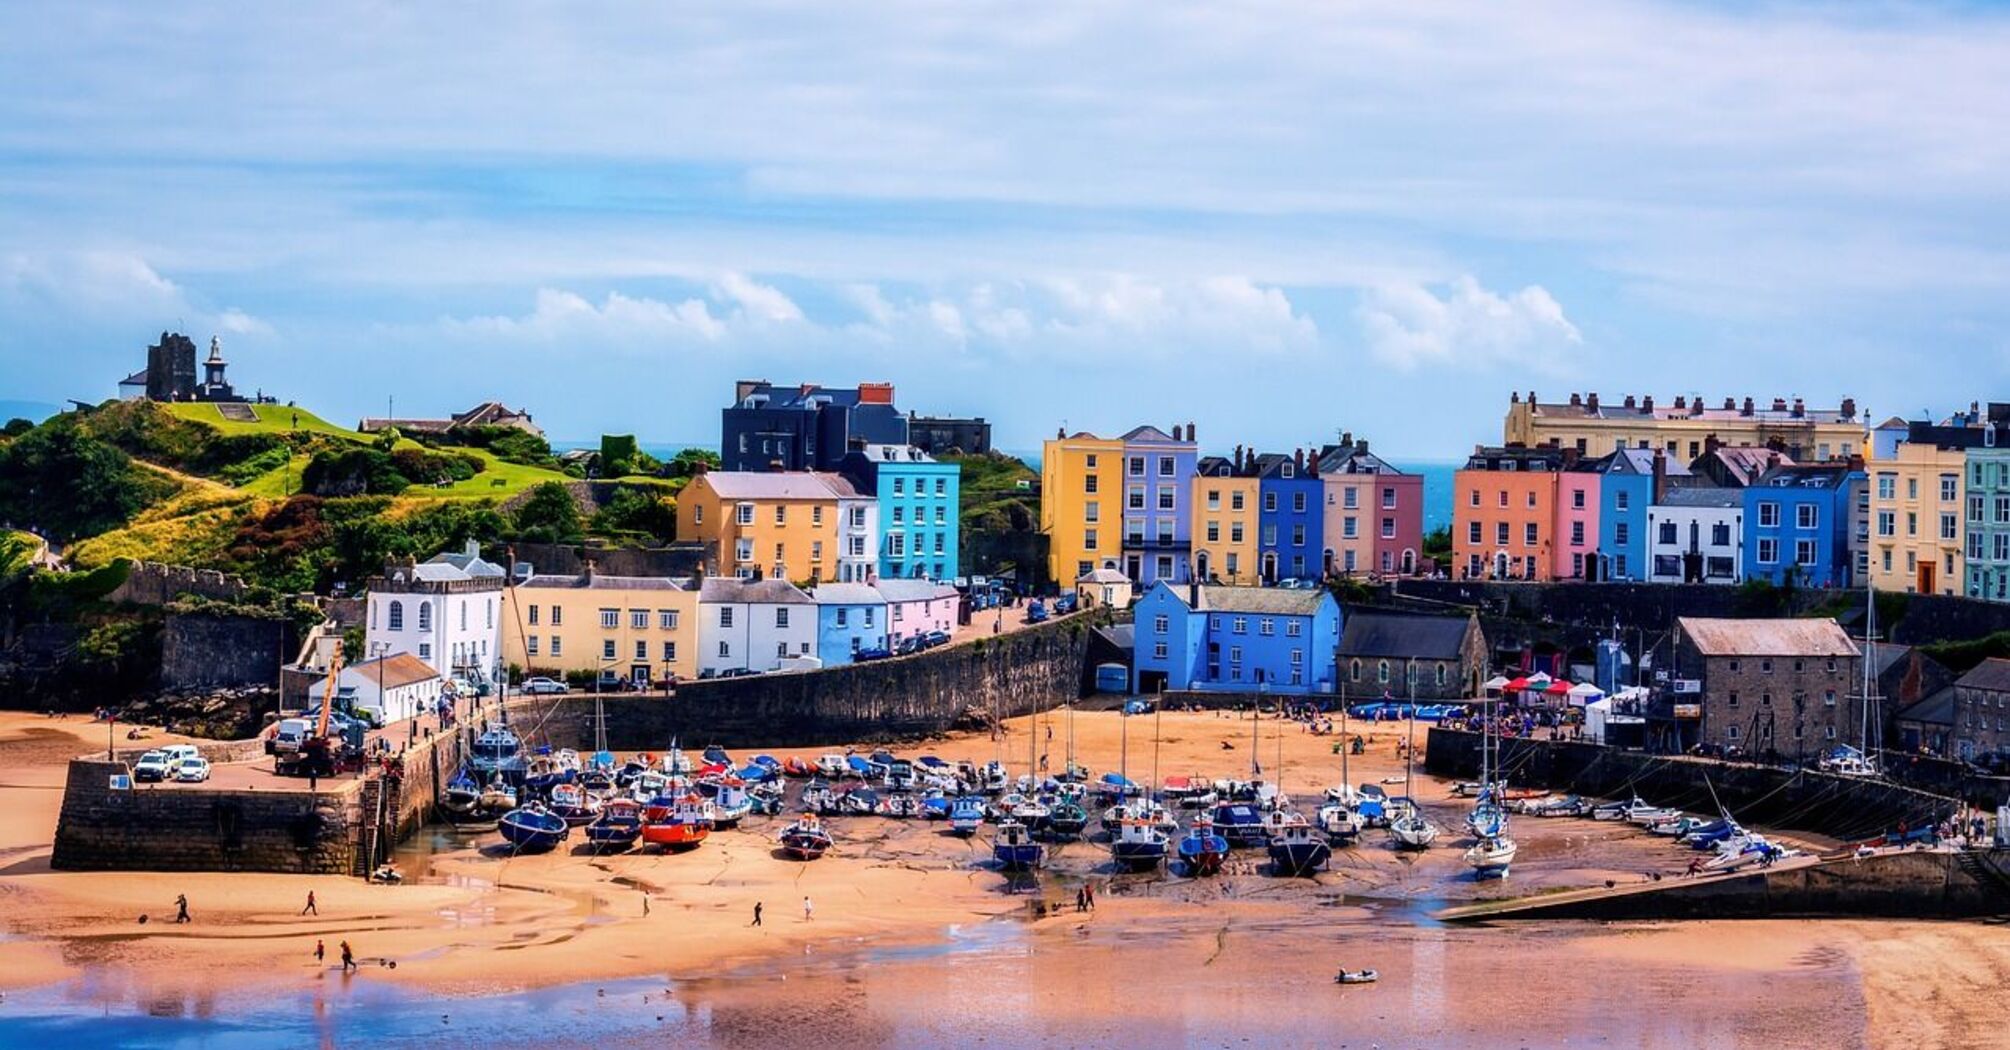 Little-known and cheap: Expert names the best holiday destination in the UK